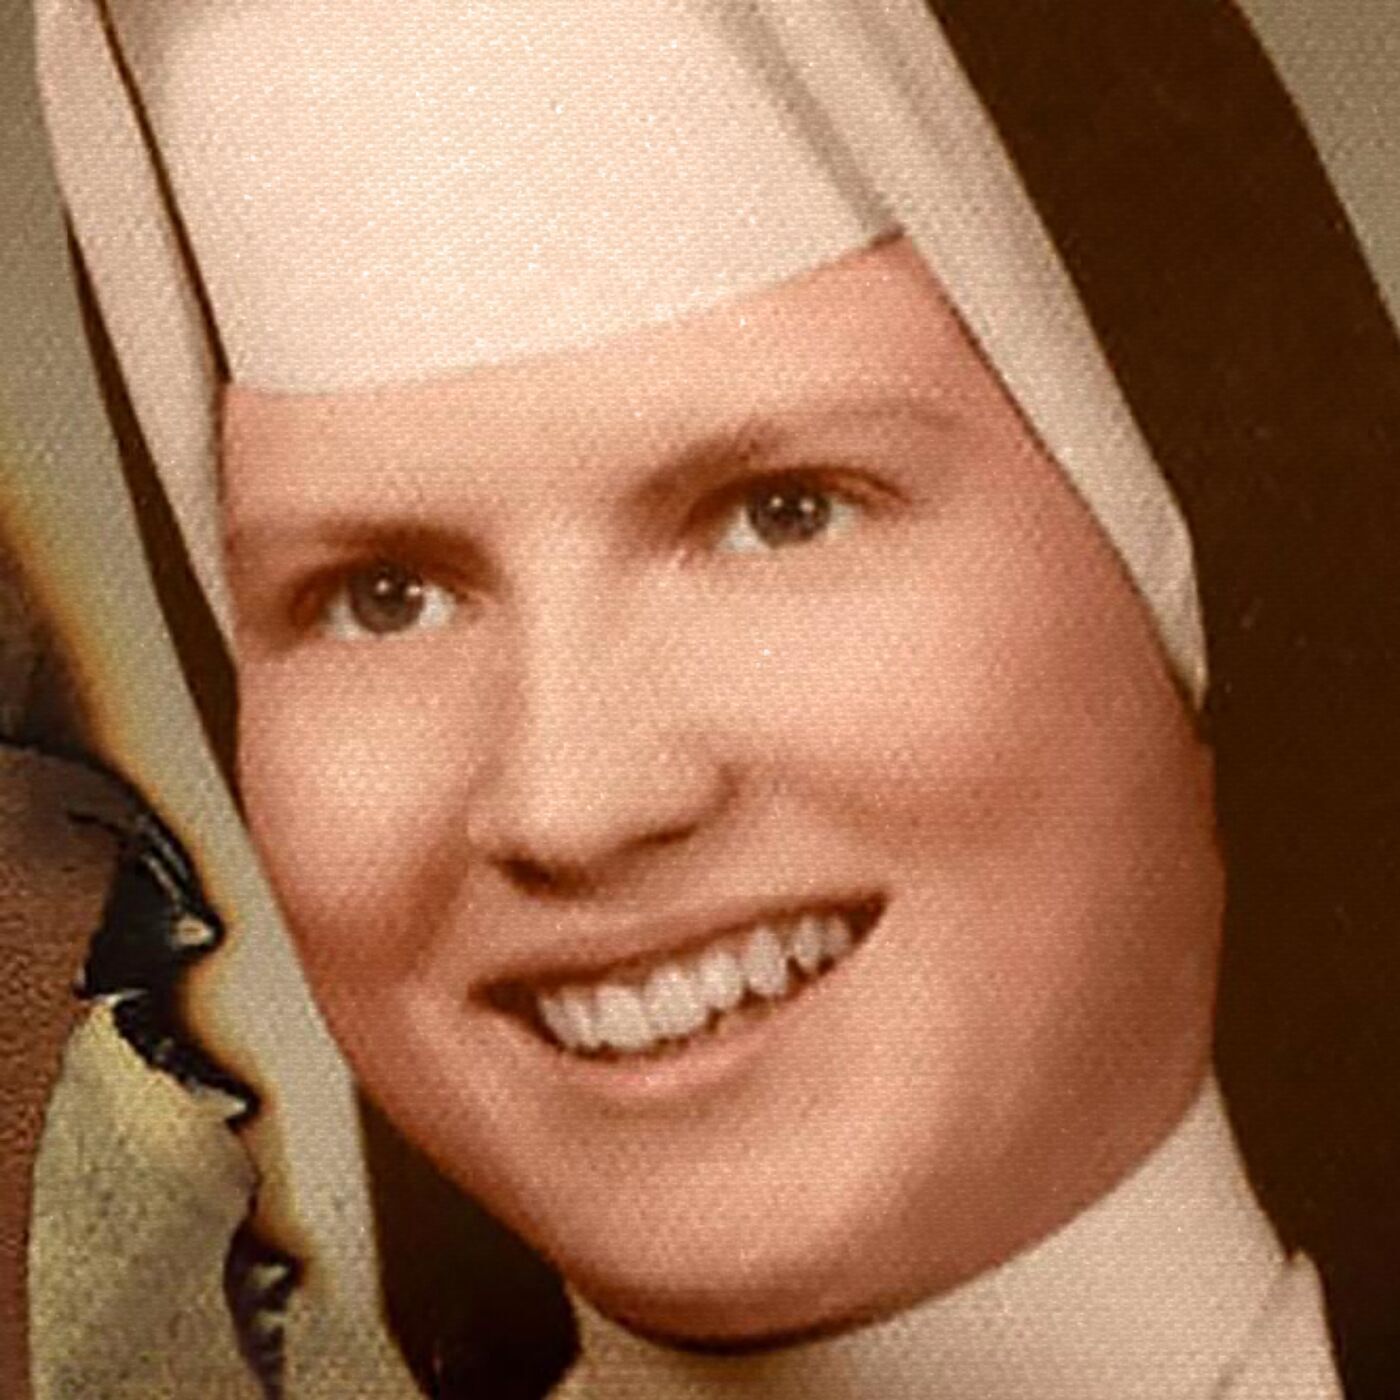 S2 Ep31: Sister Cathy, The Crusade for Justice